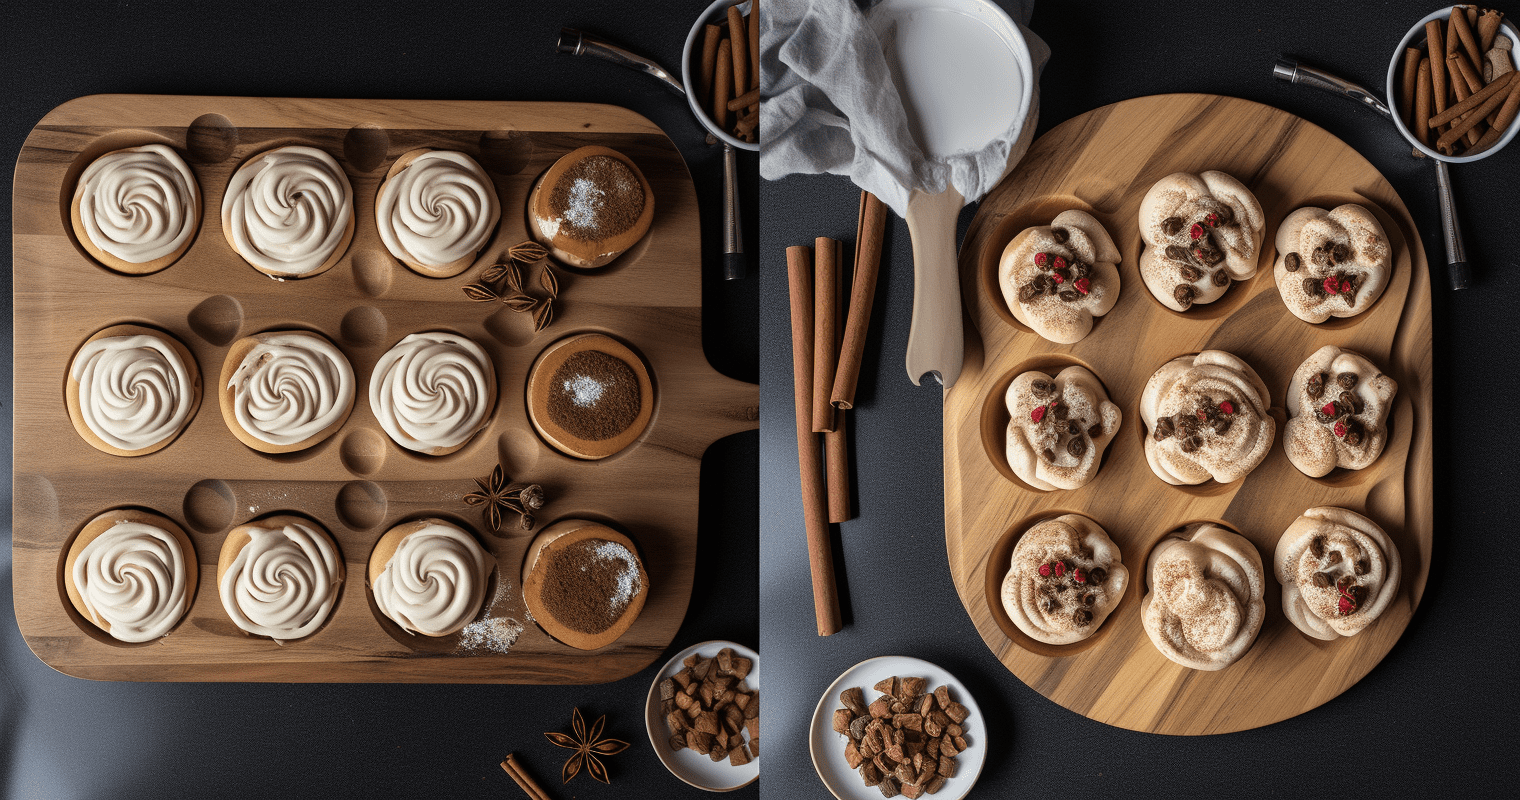 The Ultimate Cinnamon Rolls with Cream Cheese Frosting Recipe